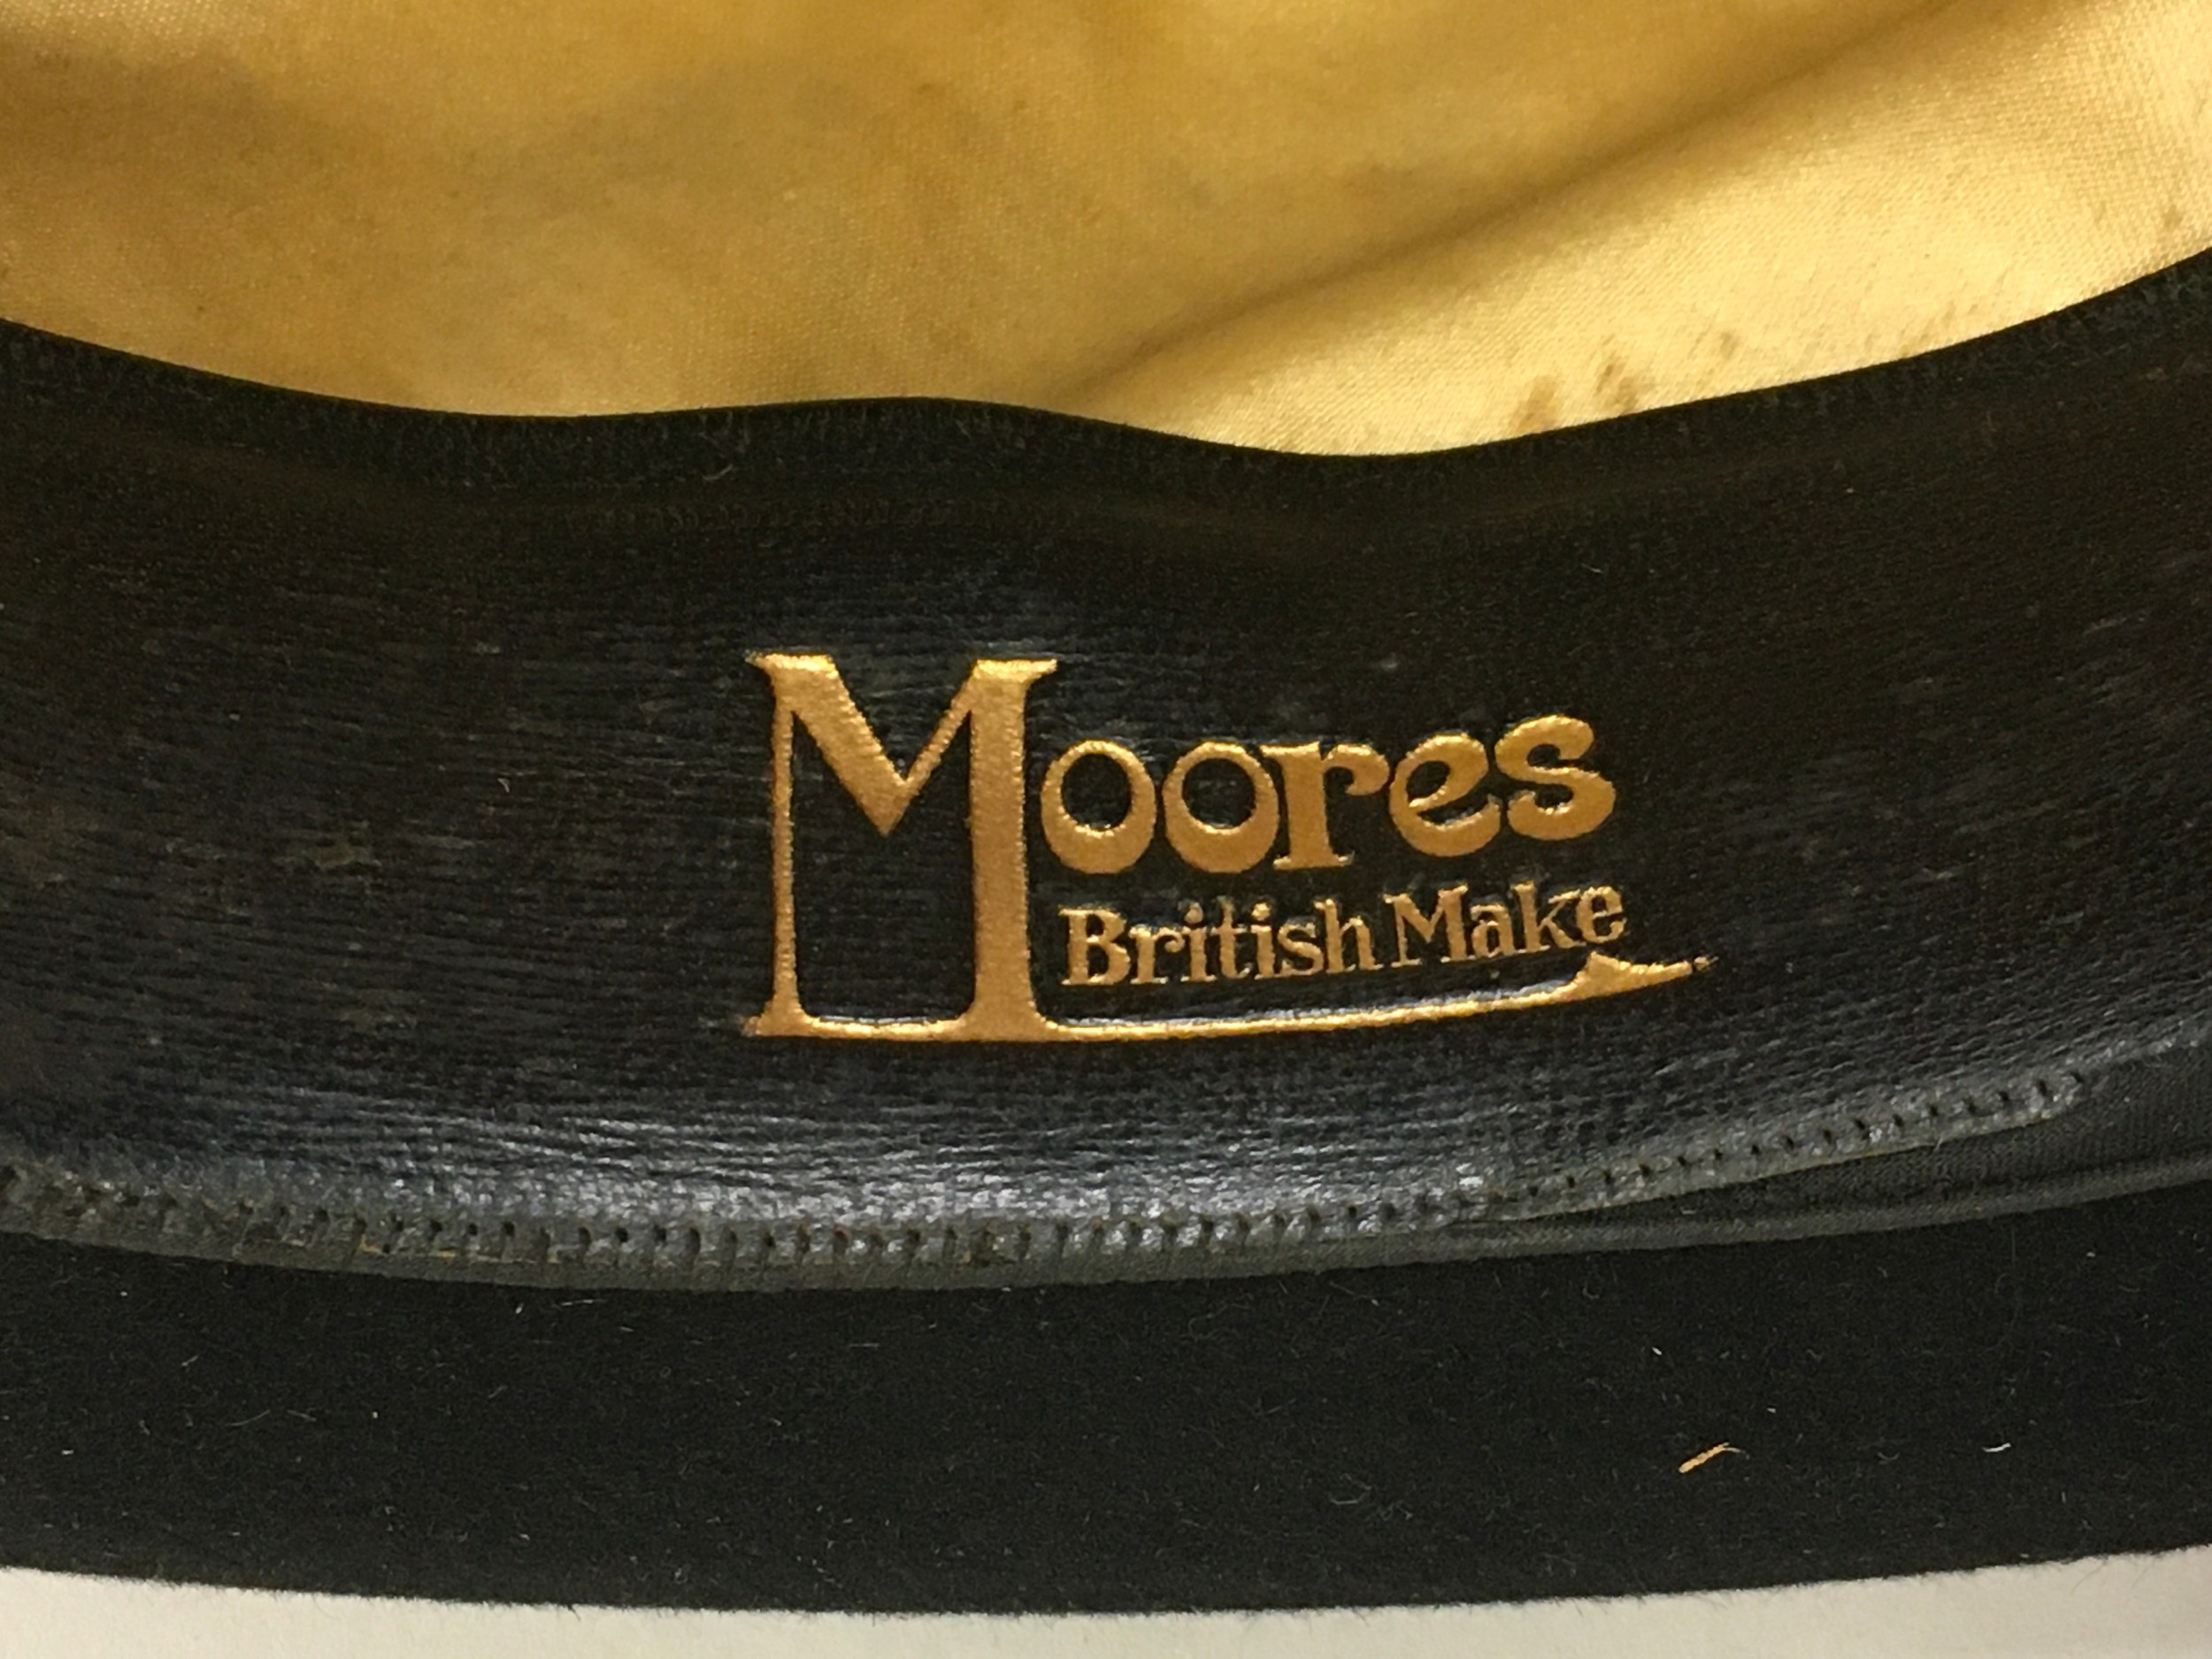 H.J. Whyatt "The Vellum" bowler hat with box marked "Moores, British Made". - Image 7 of 7